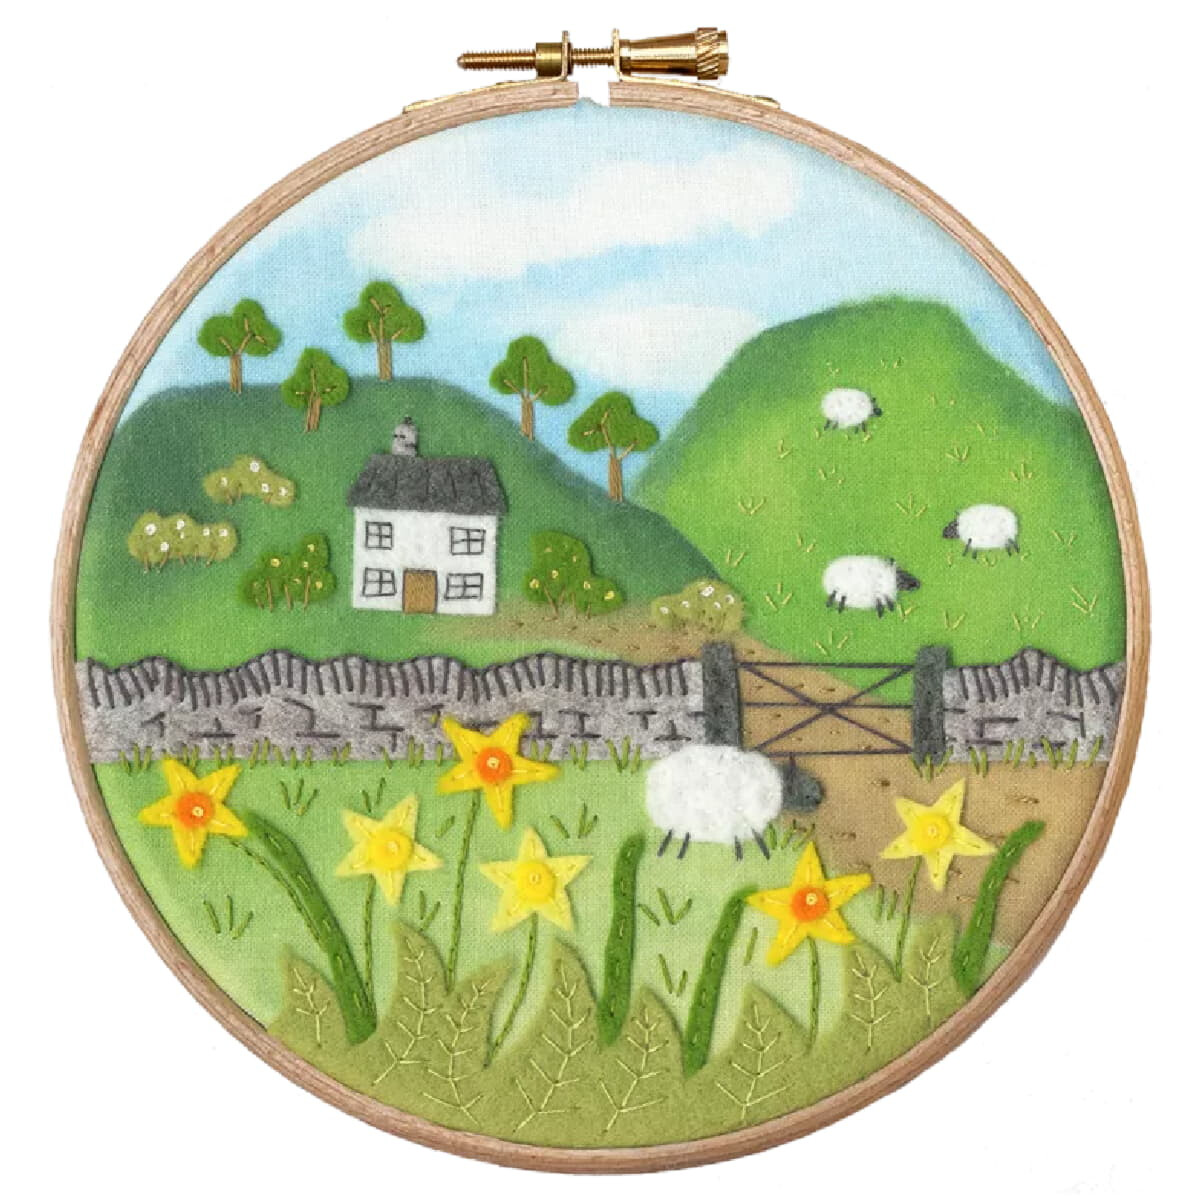 An embroidery pack or embroidery picture from Bothy...